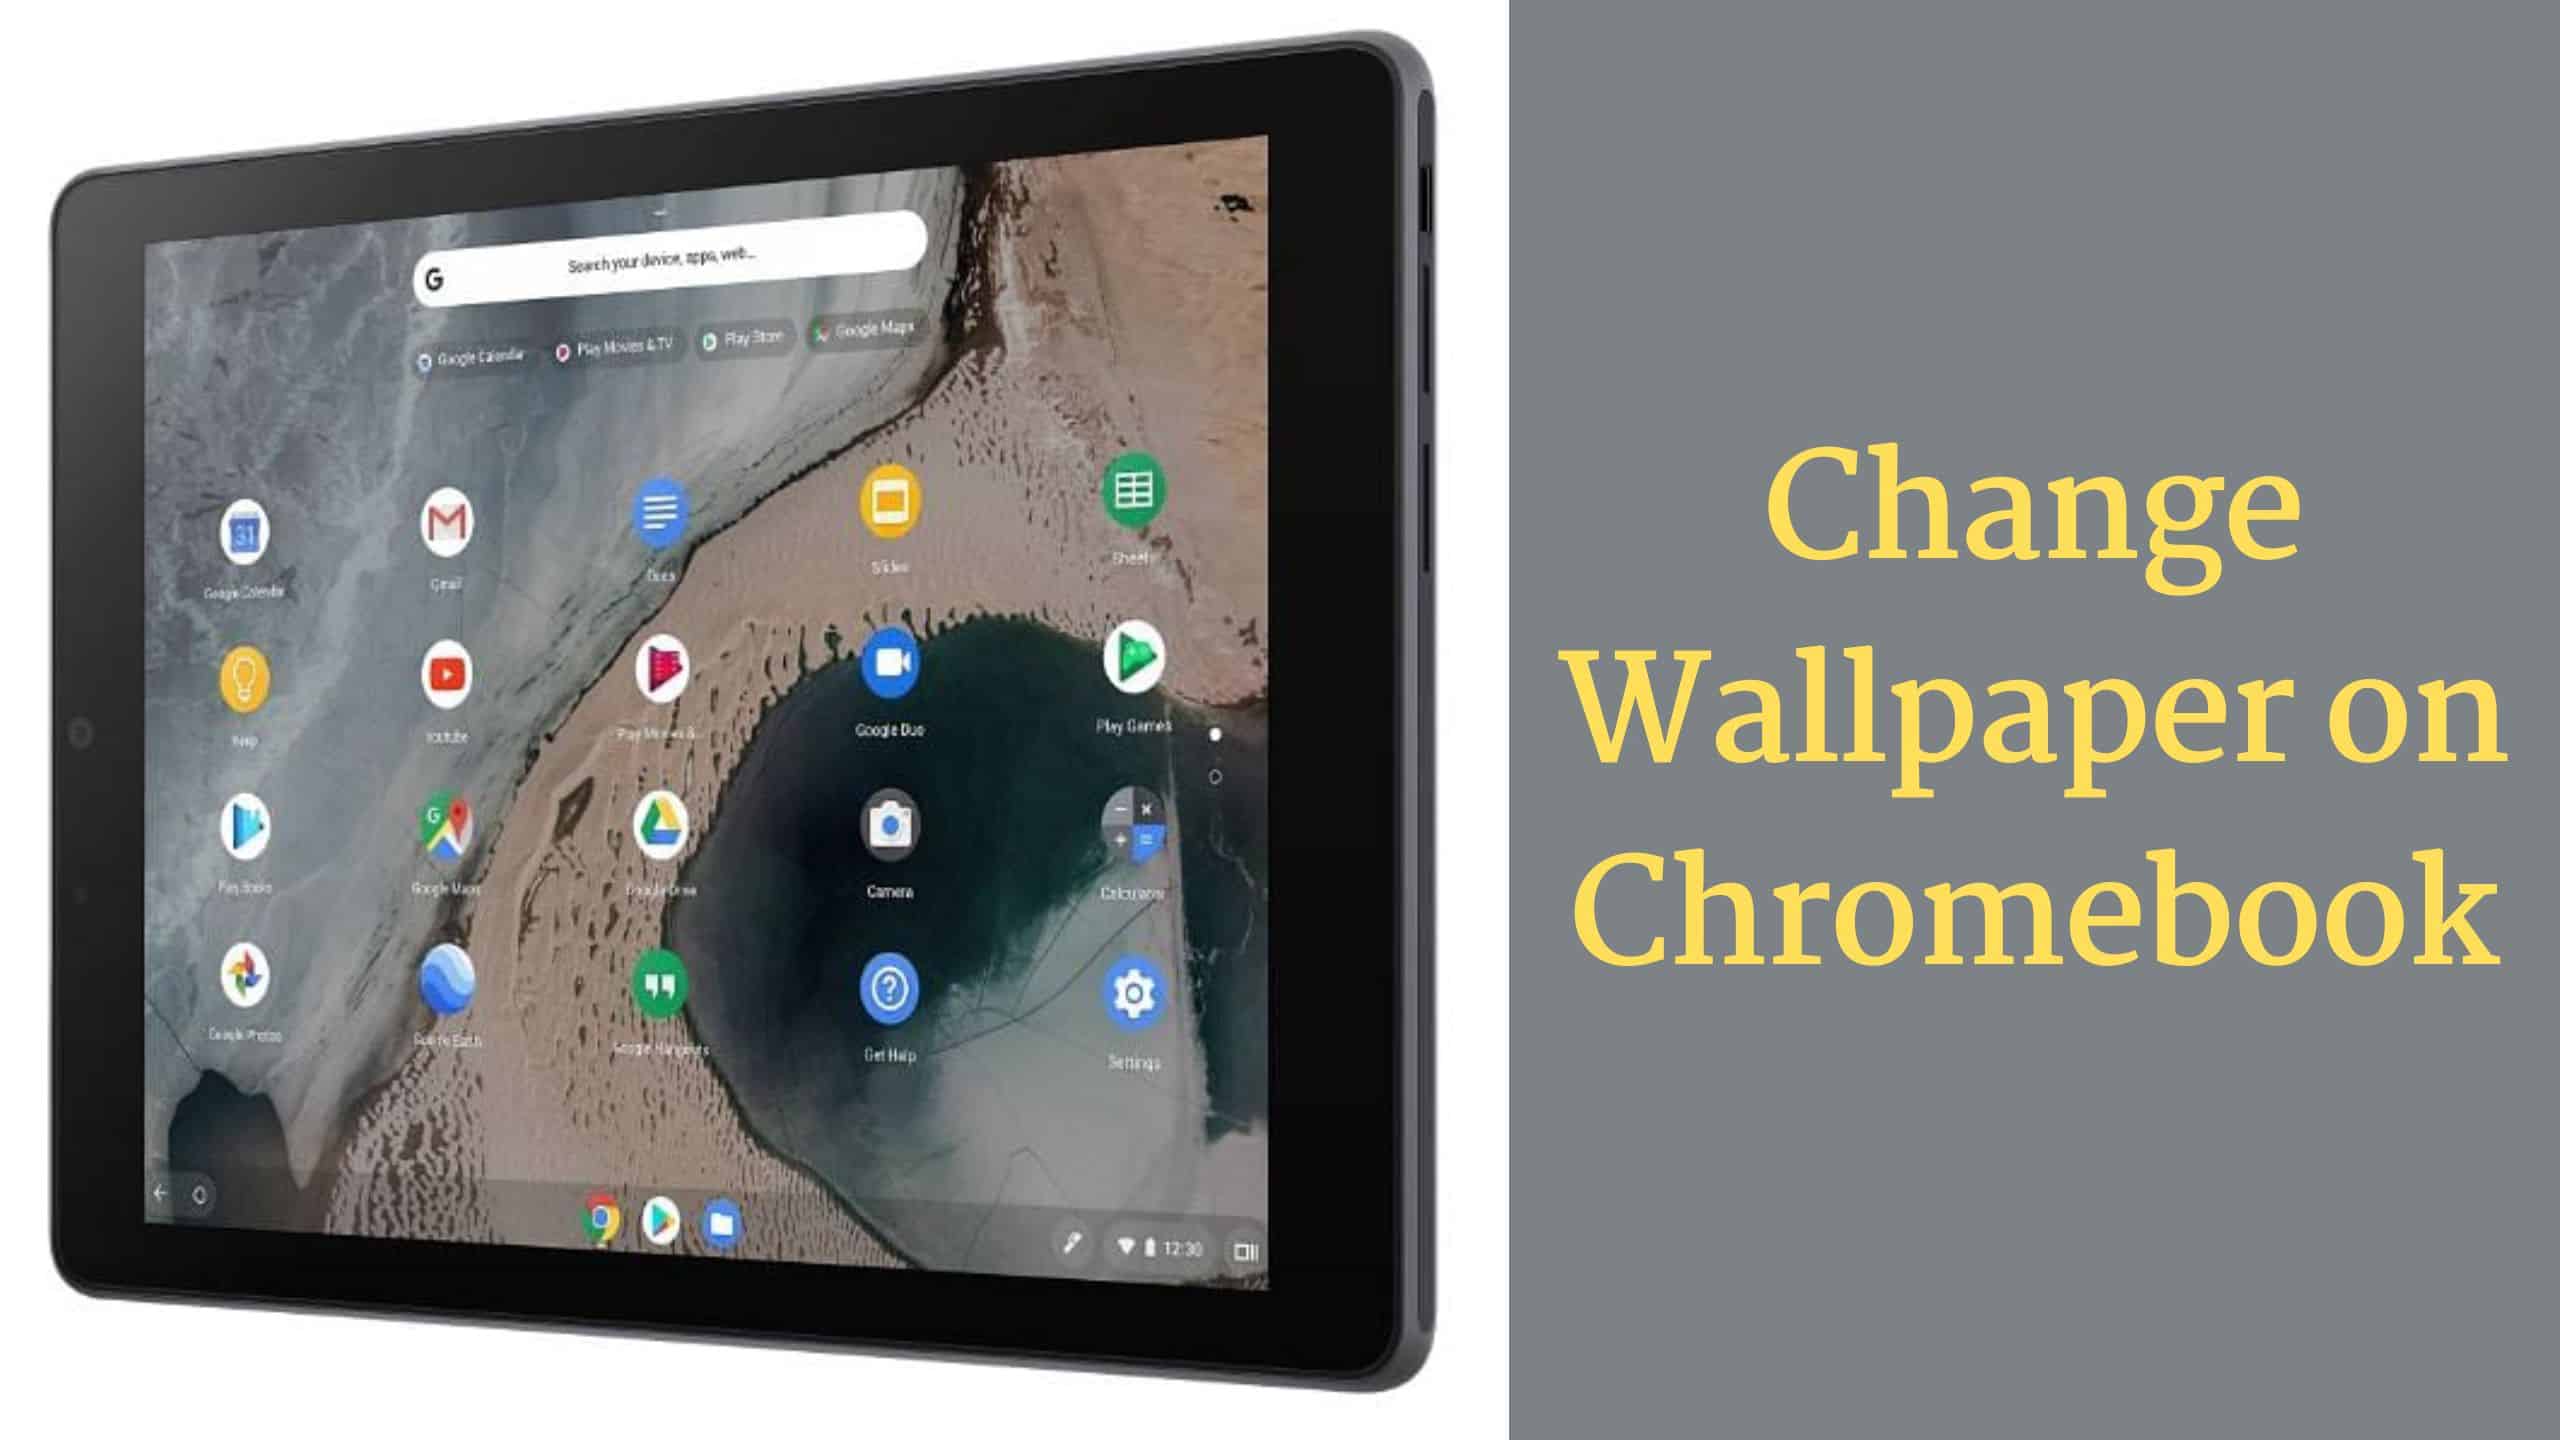 Changing the Wallpaper on Chromebook - Step by Step Guide! - WorldofTablet